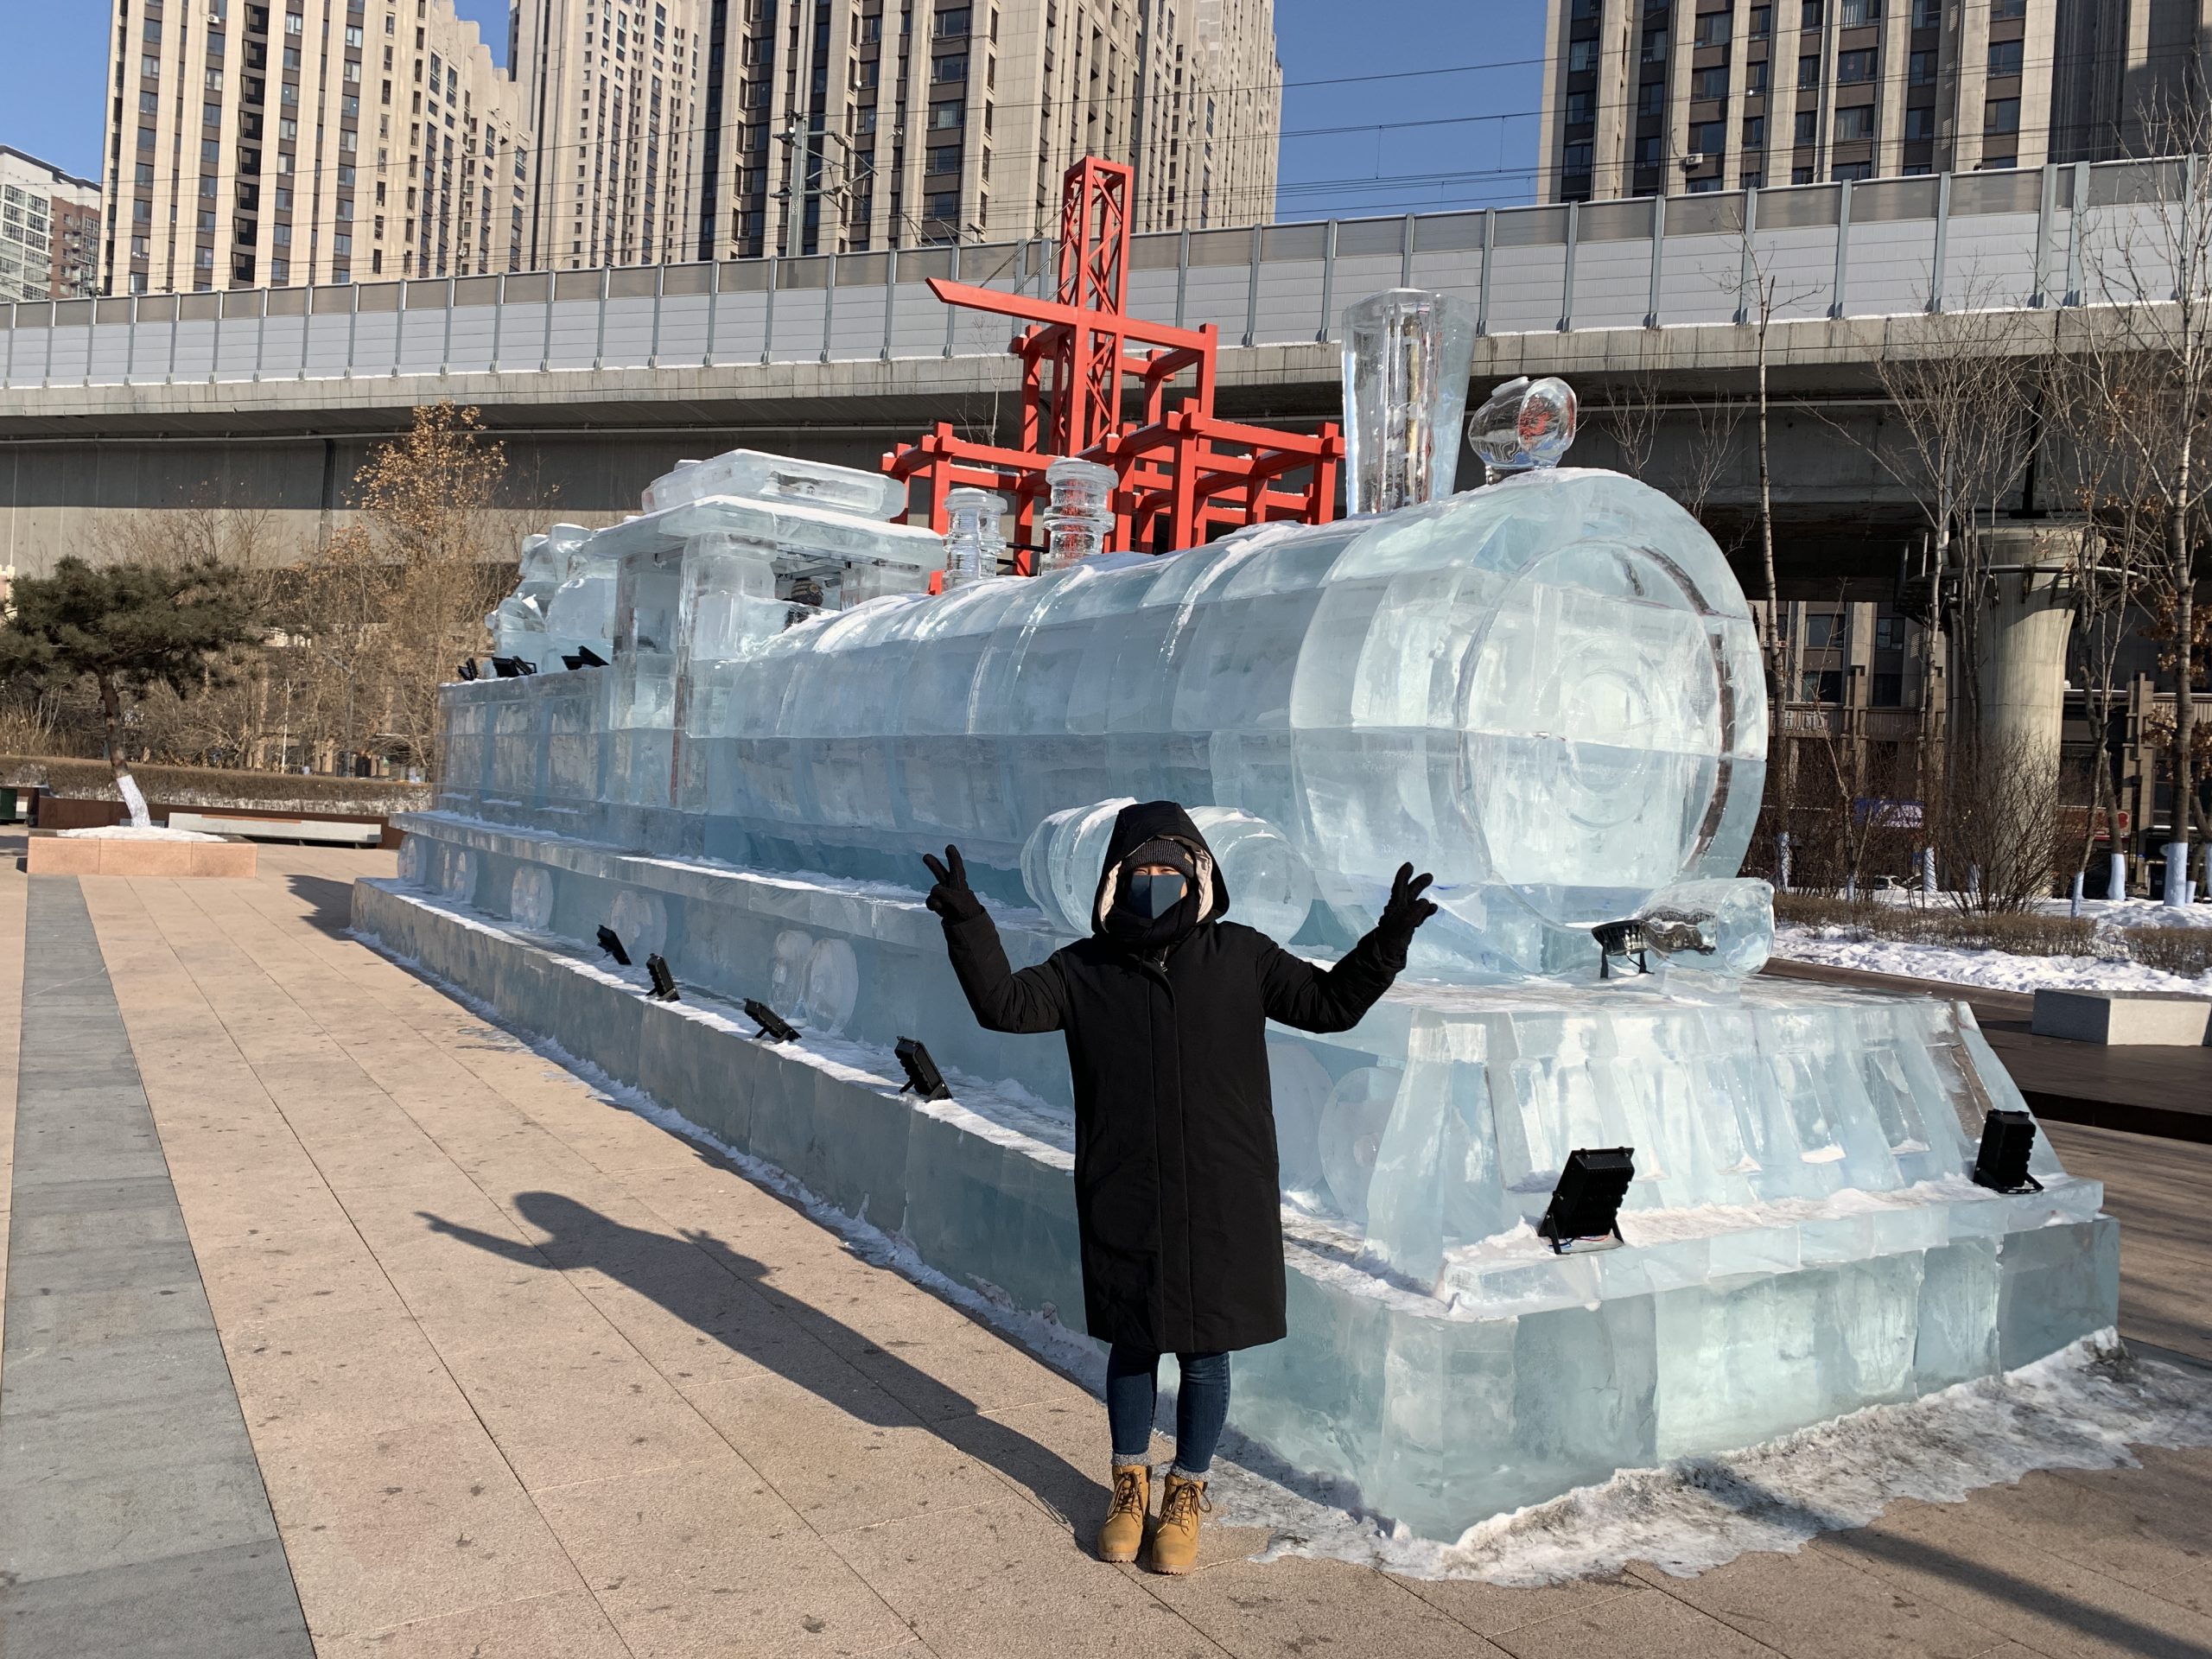 In front of an ice sculpture of a train